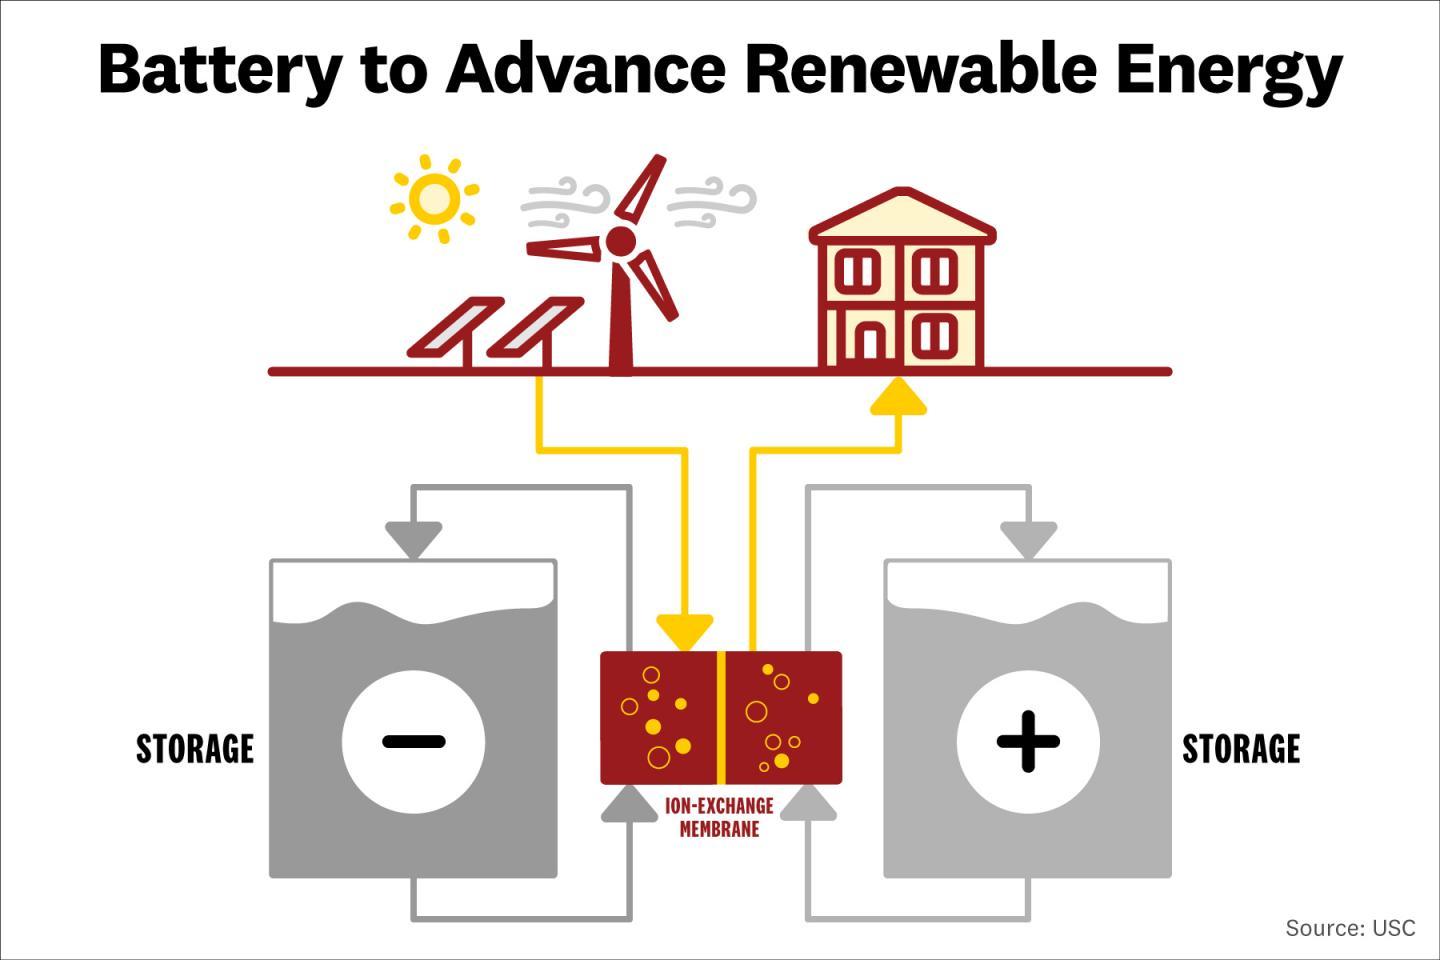 Diagram illustrating how the redox flow battery is expected to work